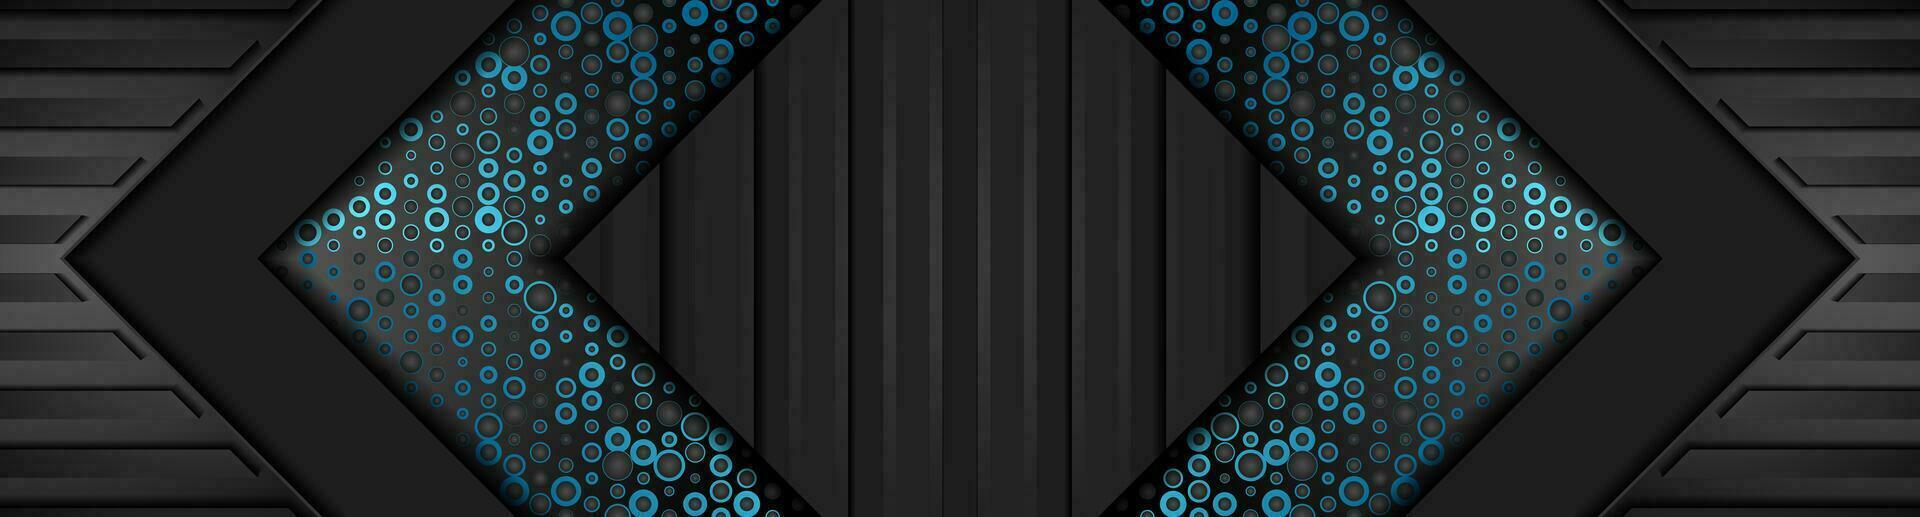 Black abstract technology banner with blue dots vector